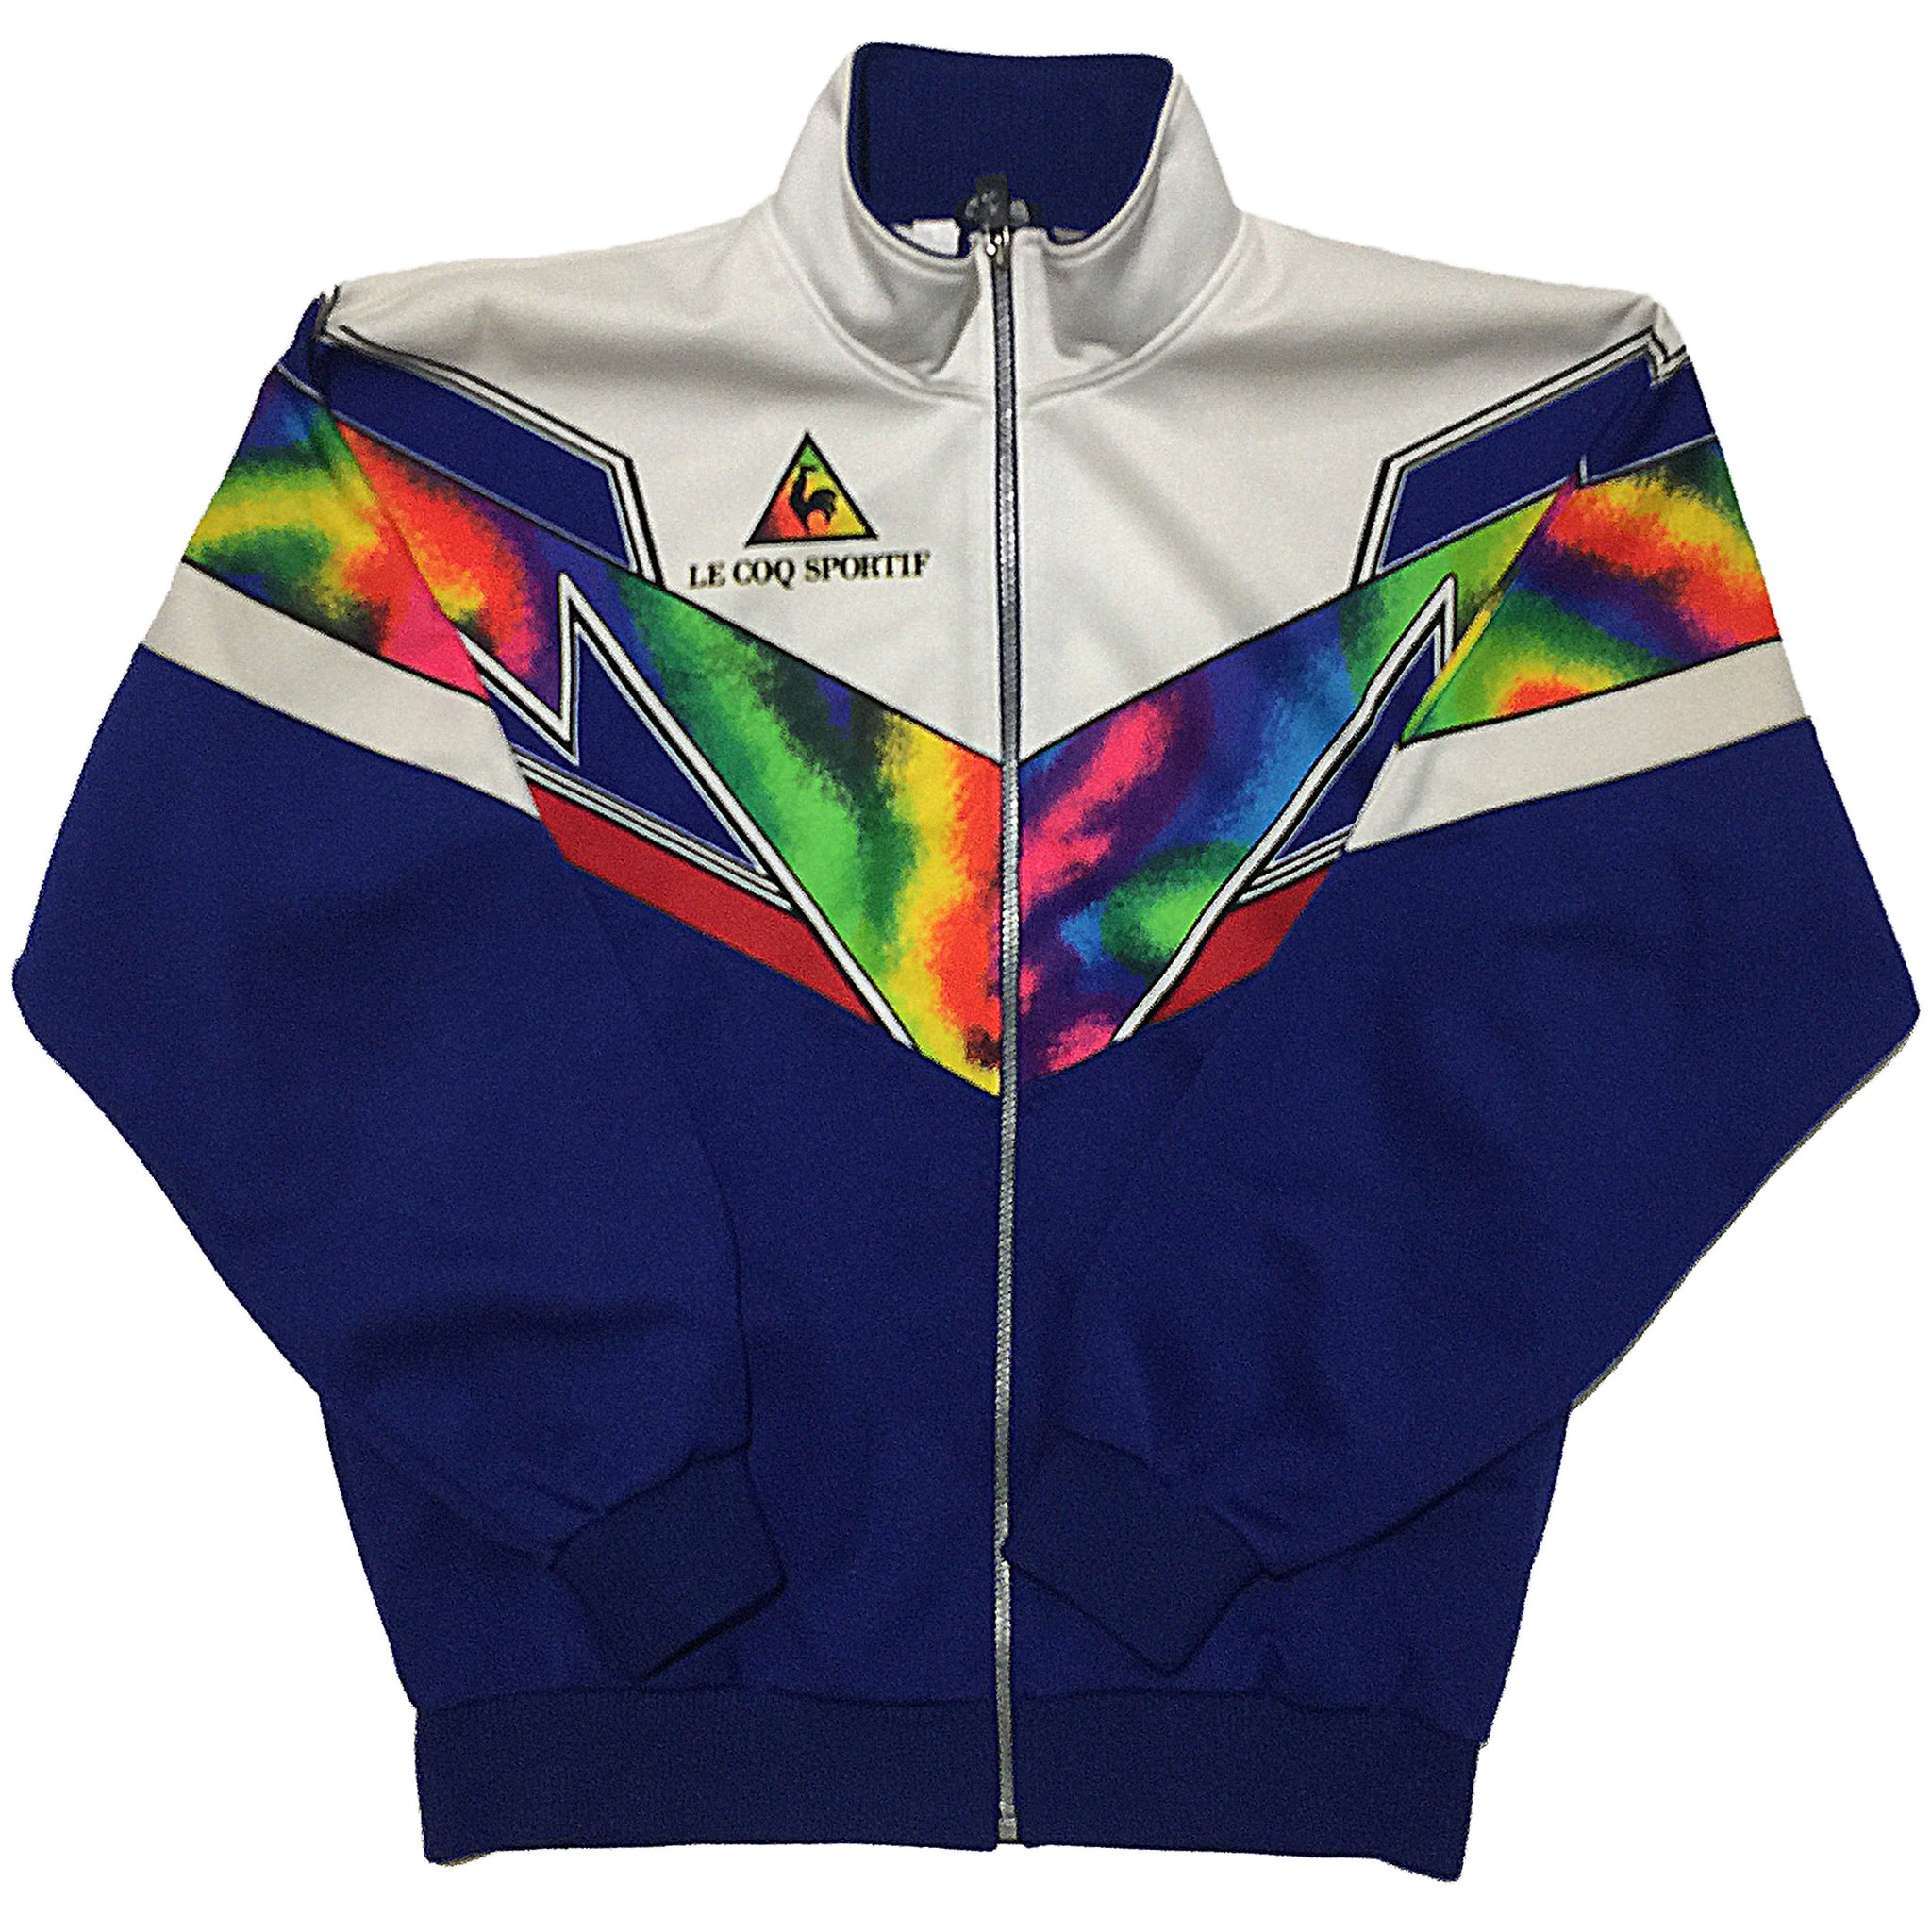 Le Coq Sportif Blue, Rainbow, and White Track Jacket